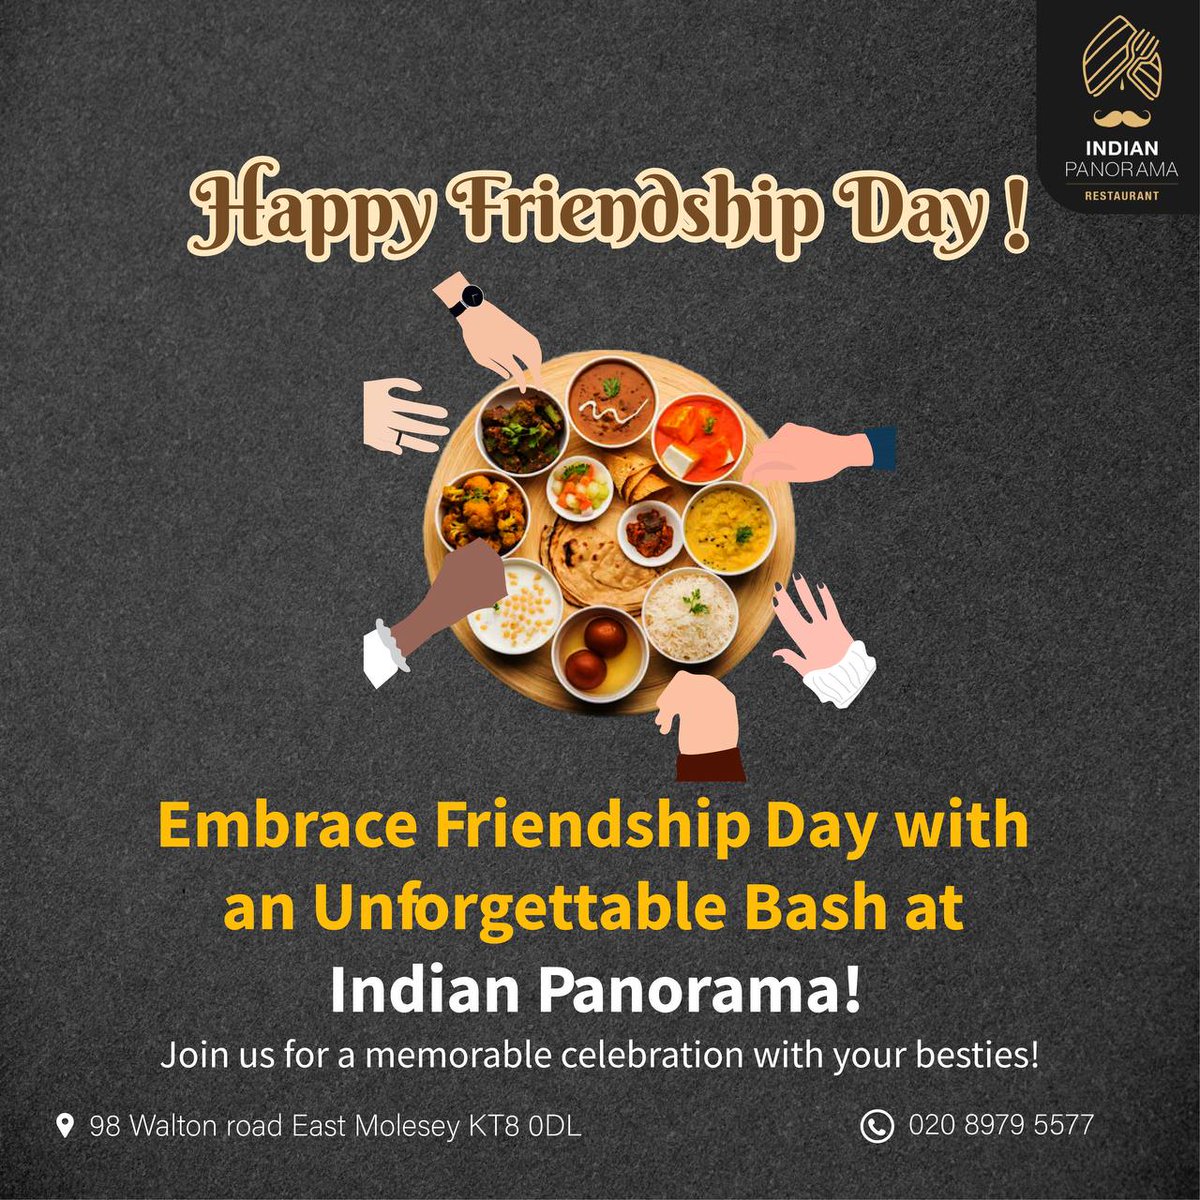 🎉 Celebrate Friendship Day in style at Indian Panorama Restaurant! 

#indianfood #republicday #wine #winelover #greece #winetasting #winetime #instawine#indiancuisine #foodie #food #restaurant #instafood #foodblogger #dinner #indian #vegetarian #curry #delicious #tandoorichicken